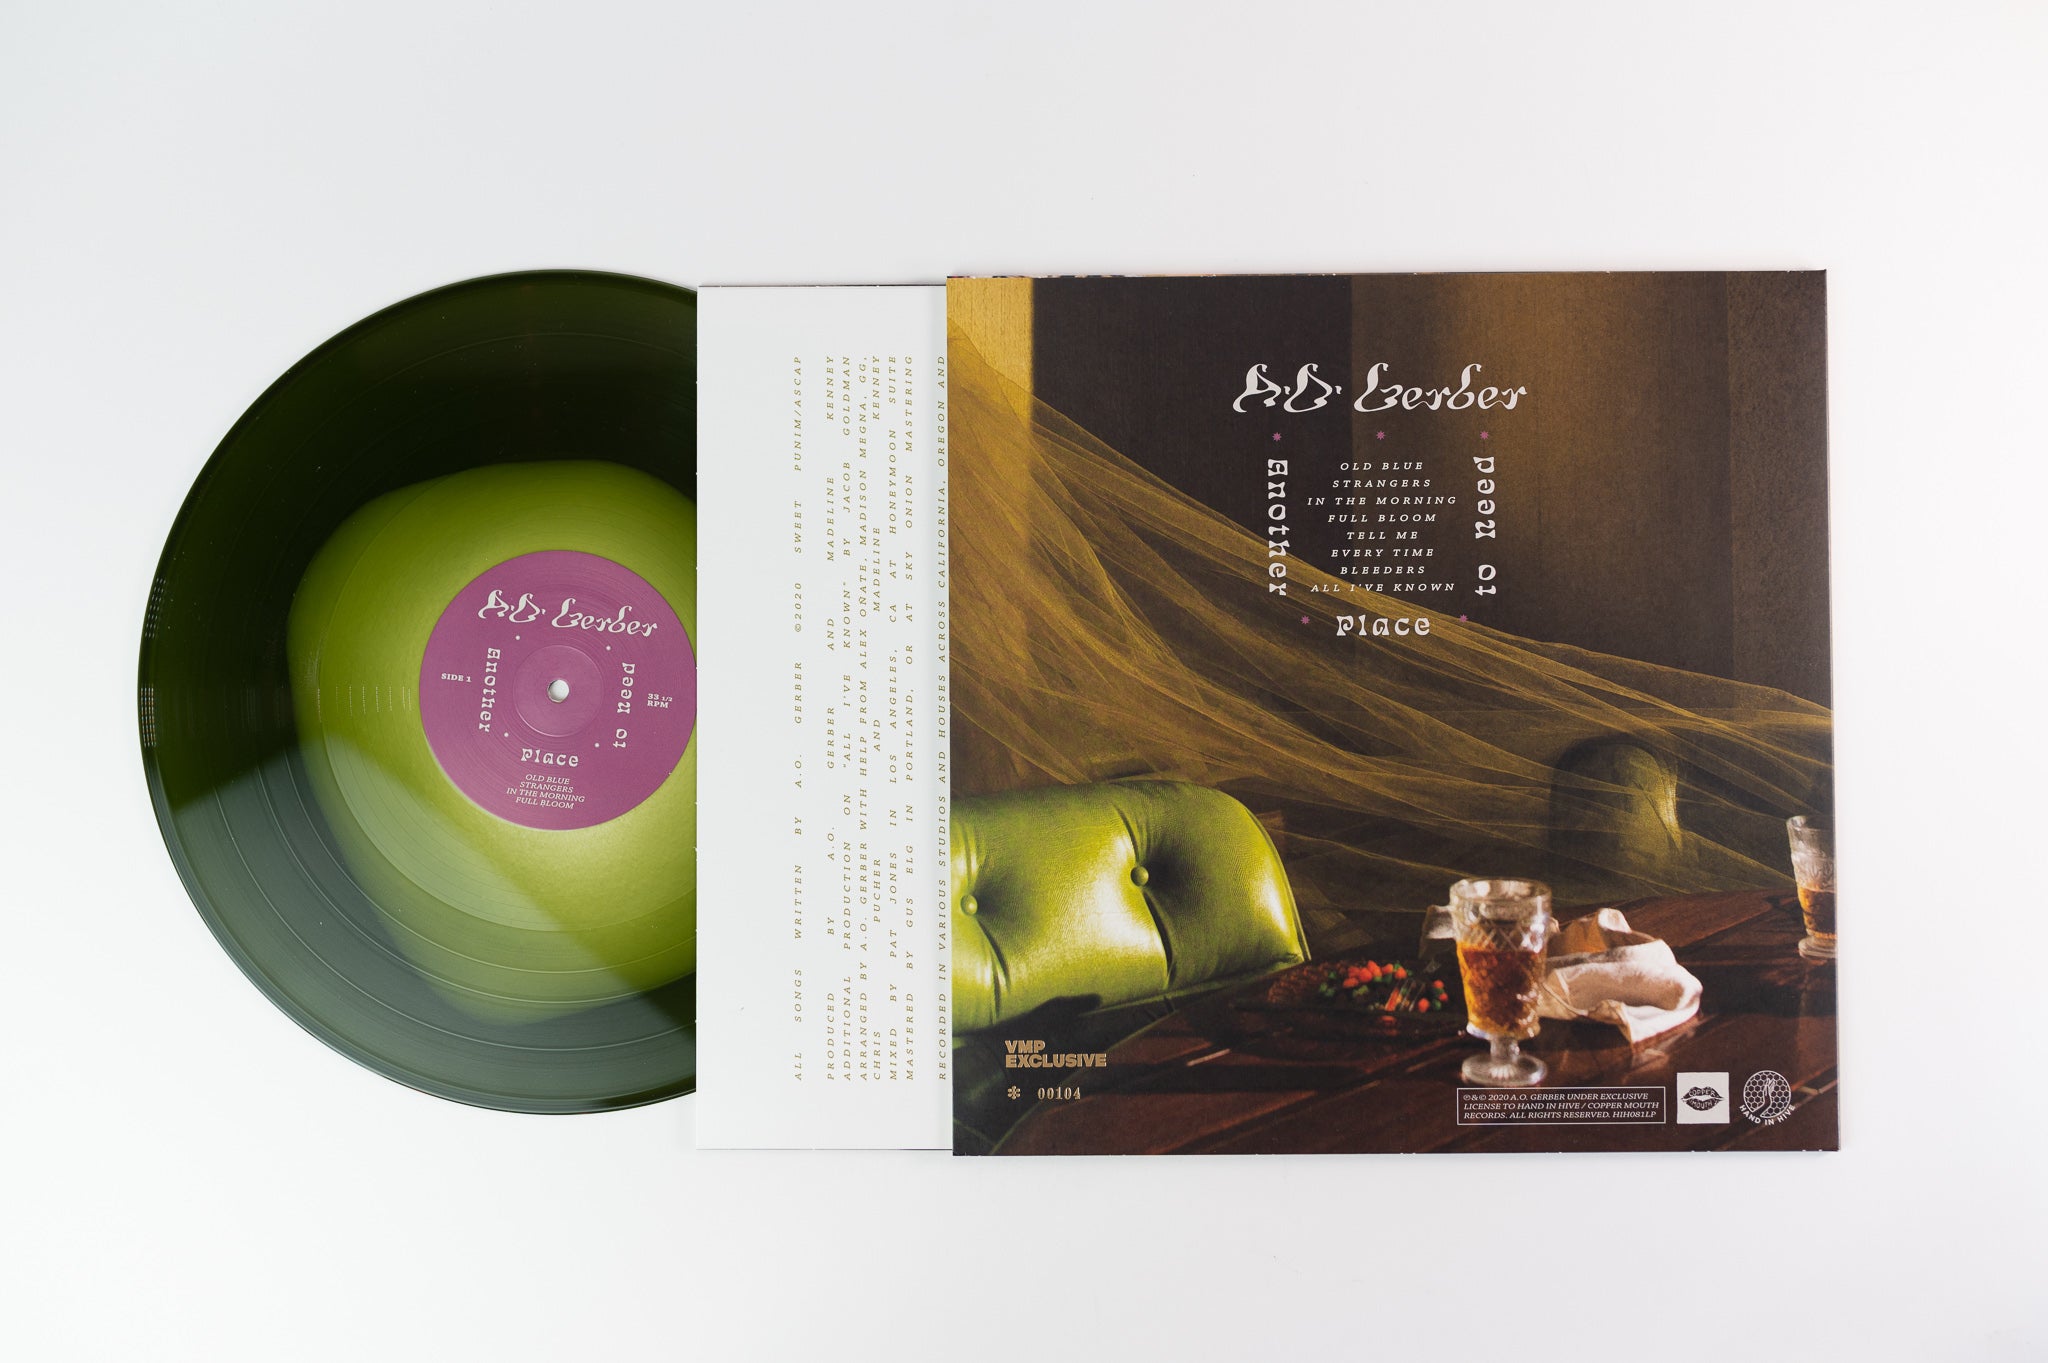 A.O. Gerber - Another Place To Need Vinyl Me Please Ltd Numbered Cream in Forest Green